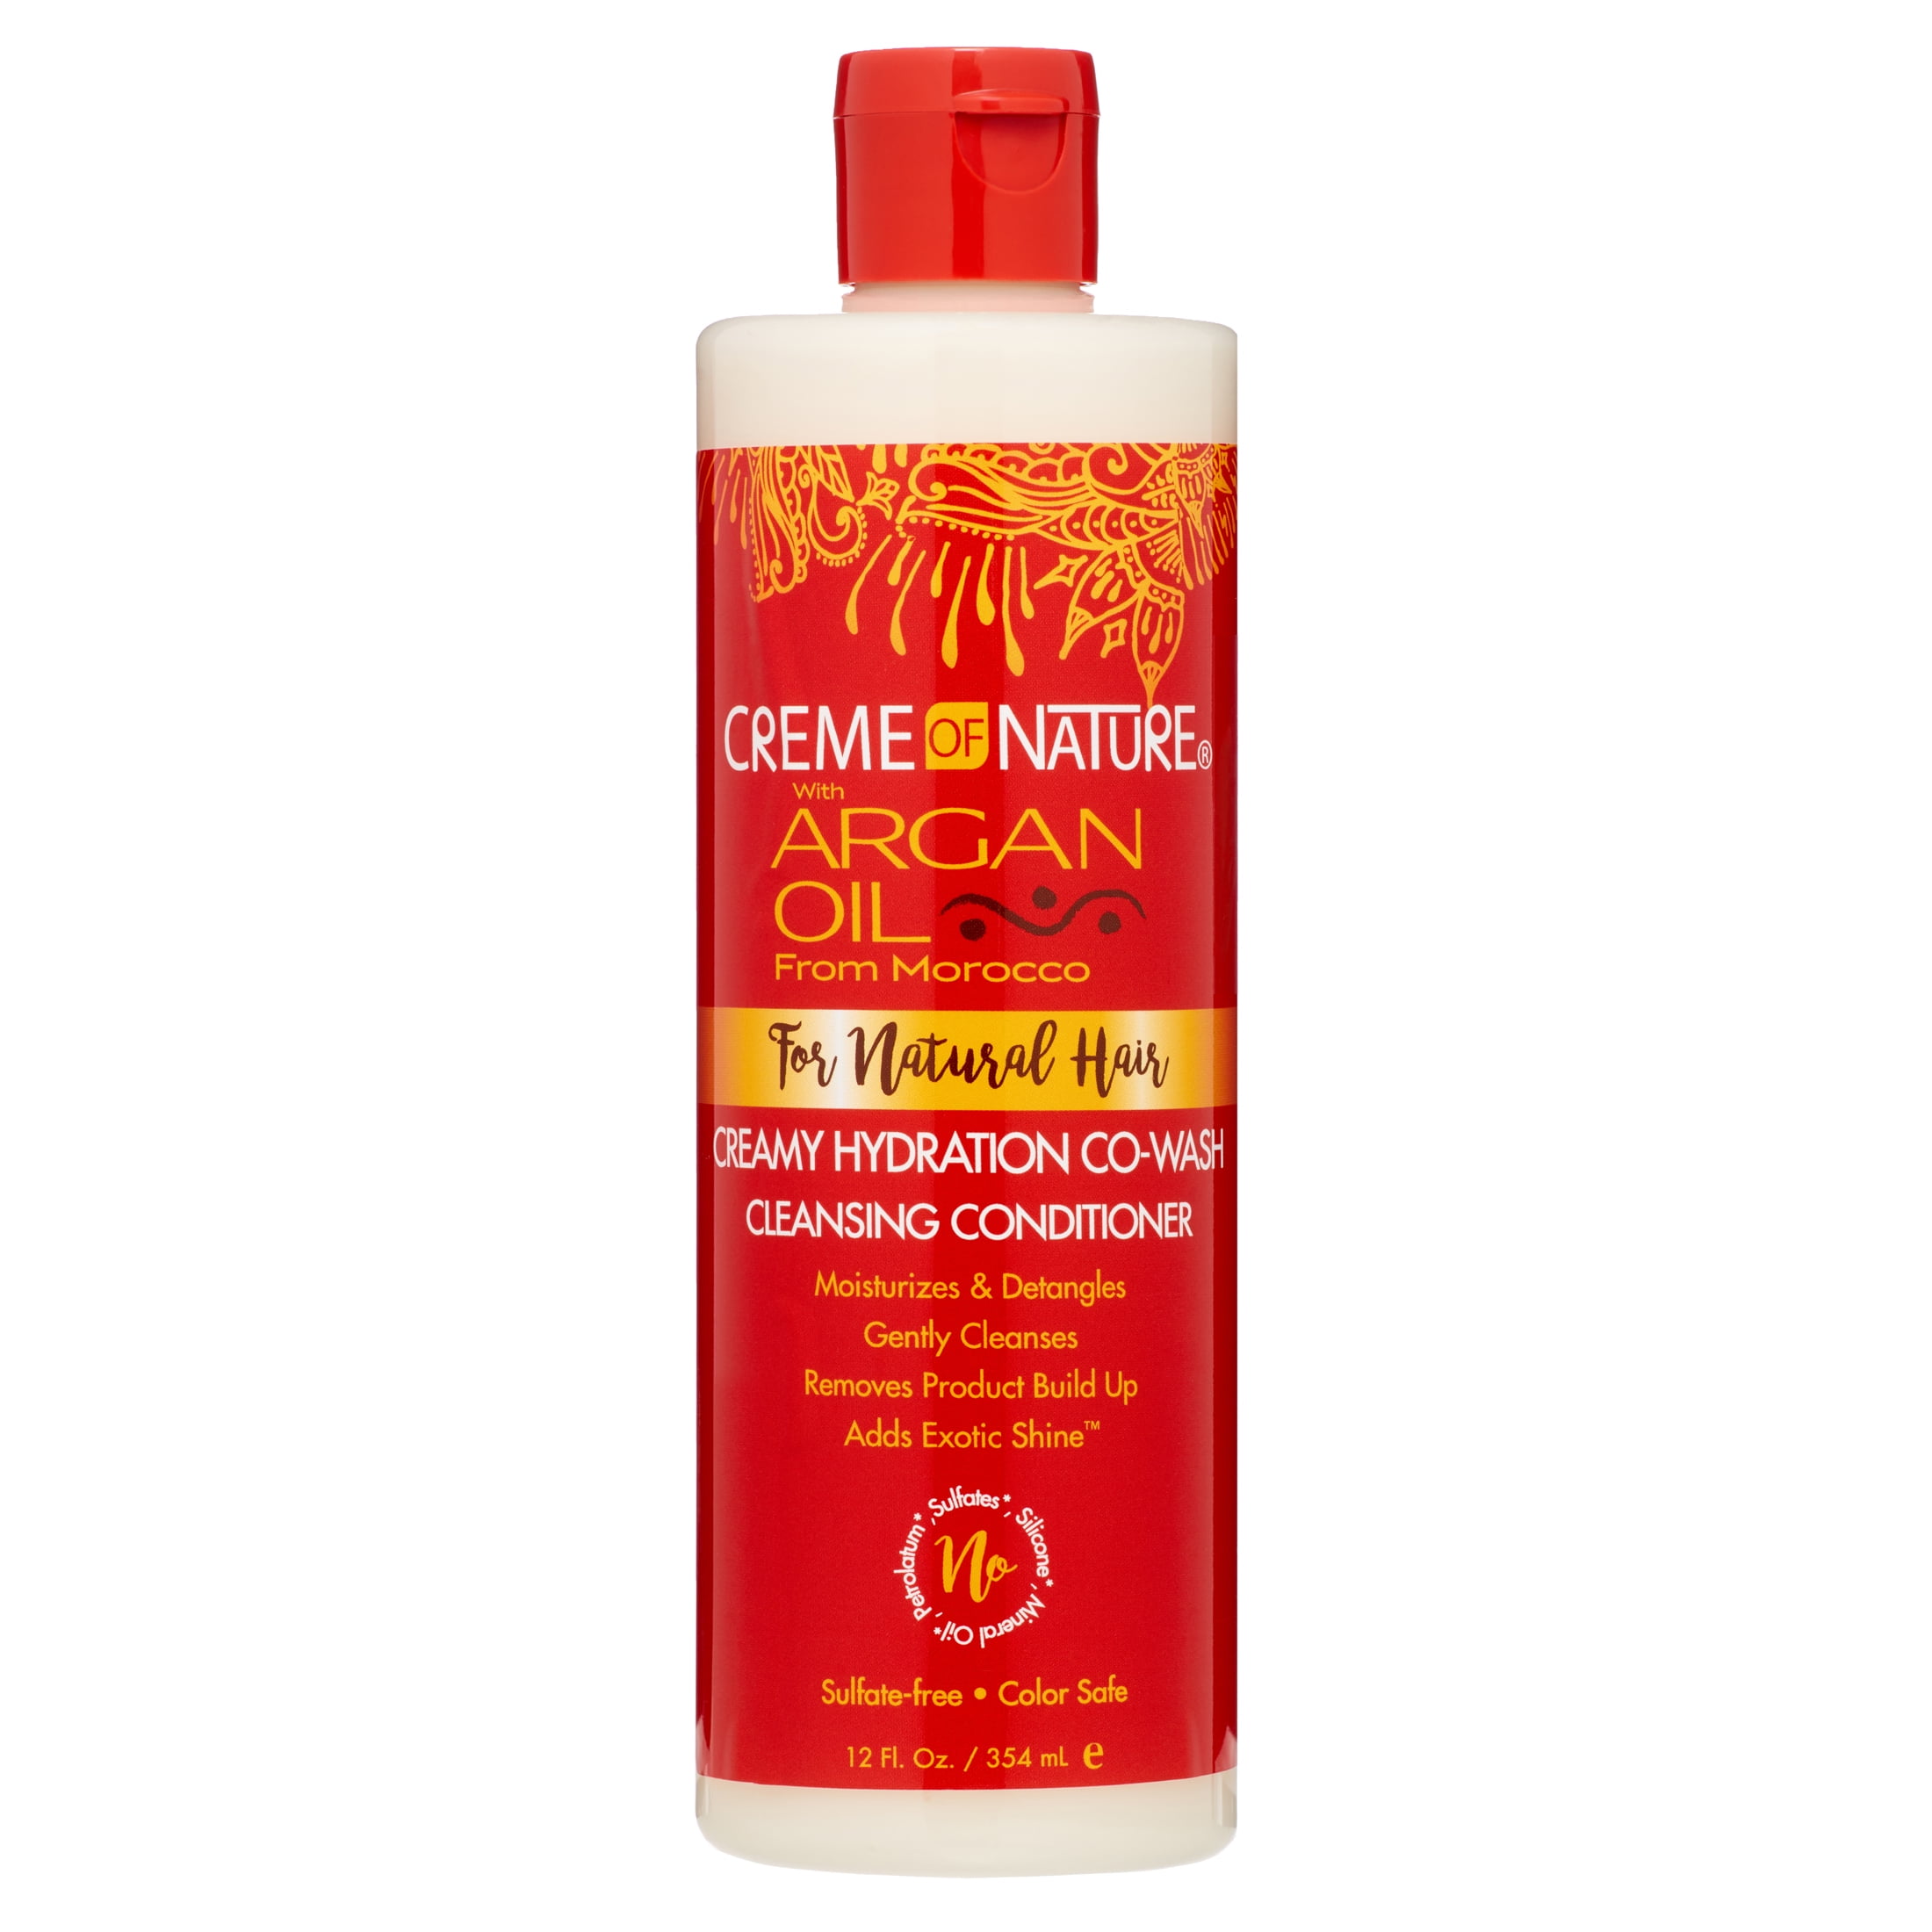 Creme of Nature Pure-Licious Co-Wash Cleansing Conditioner, 12 fl oz Walmart.com